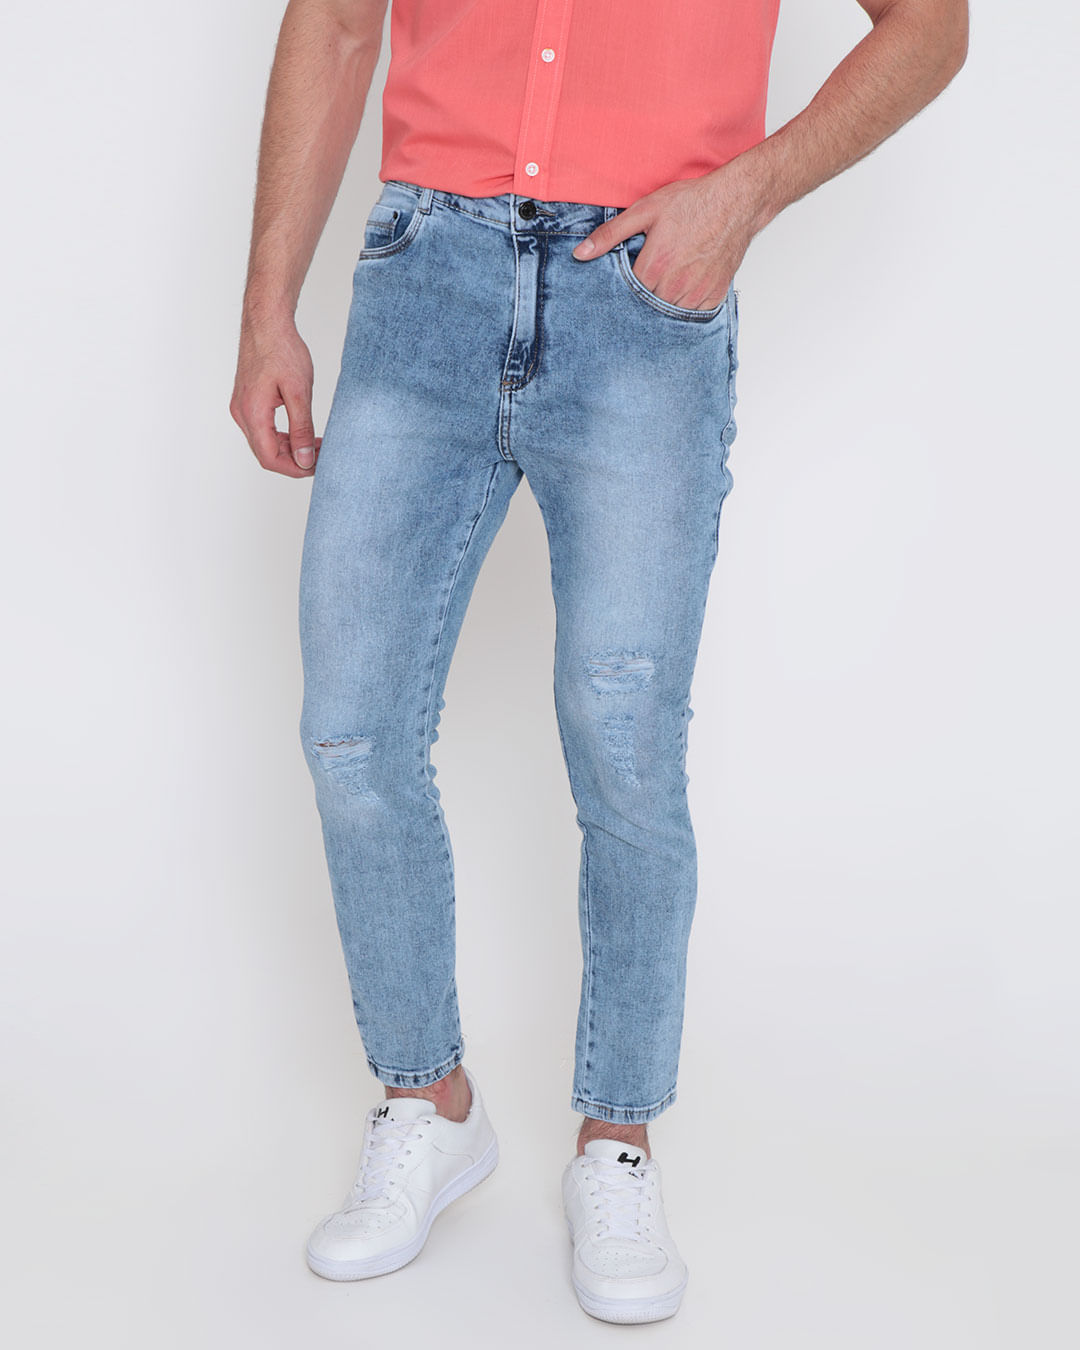 Calca-Jeans-Masculina-Cropped-Destroyed-Azul